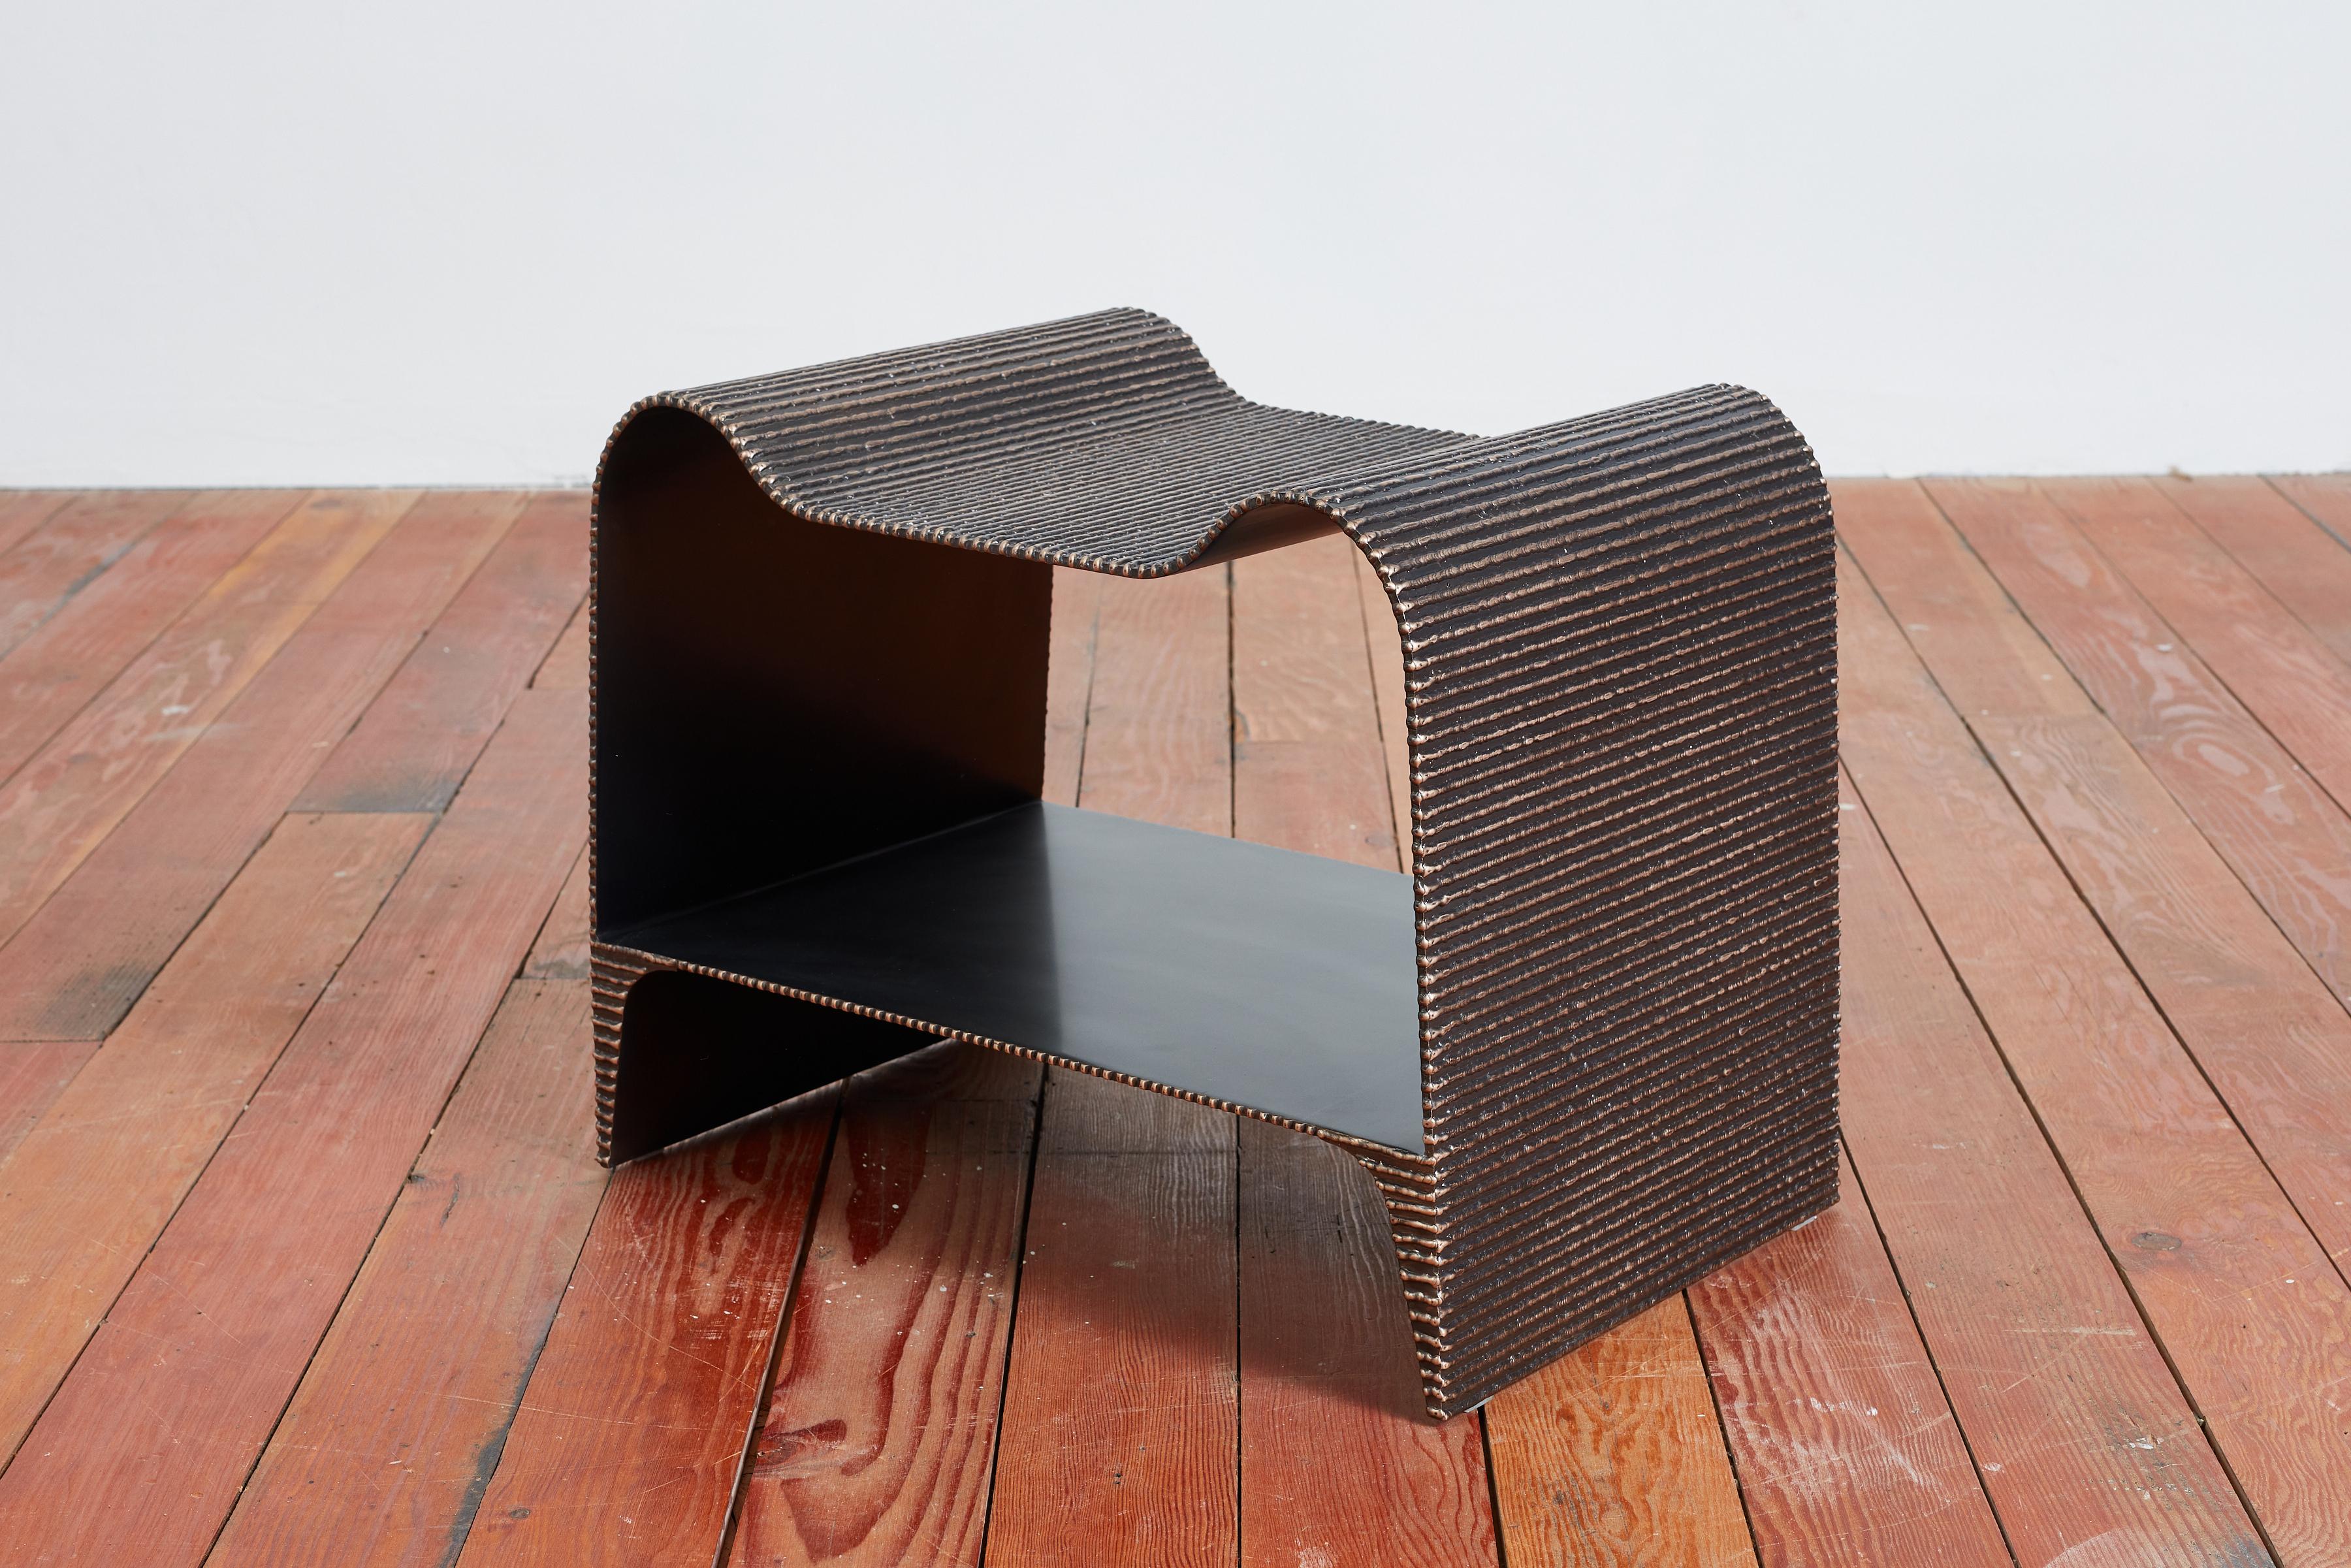 Molten End Table by William Emmerson
Dimensions: D 40,7 x W 59, 7x H 48,3 cm.
Materials: Bronze and steel.
 
William Emmerson's brilliantly designed 